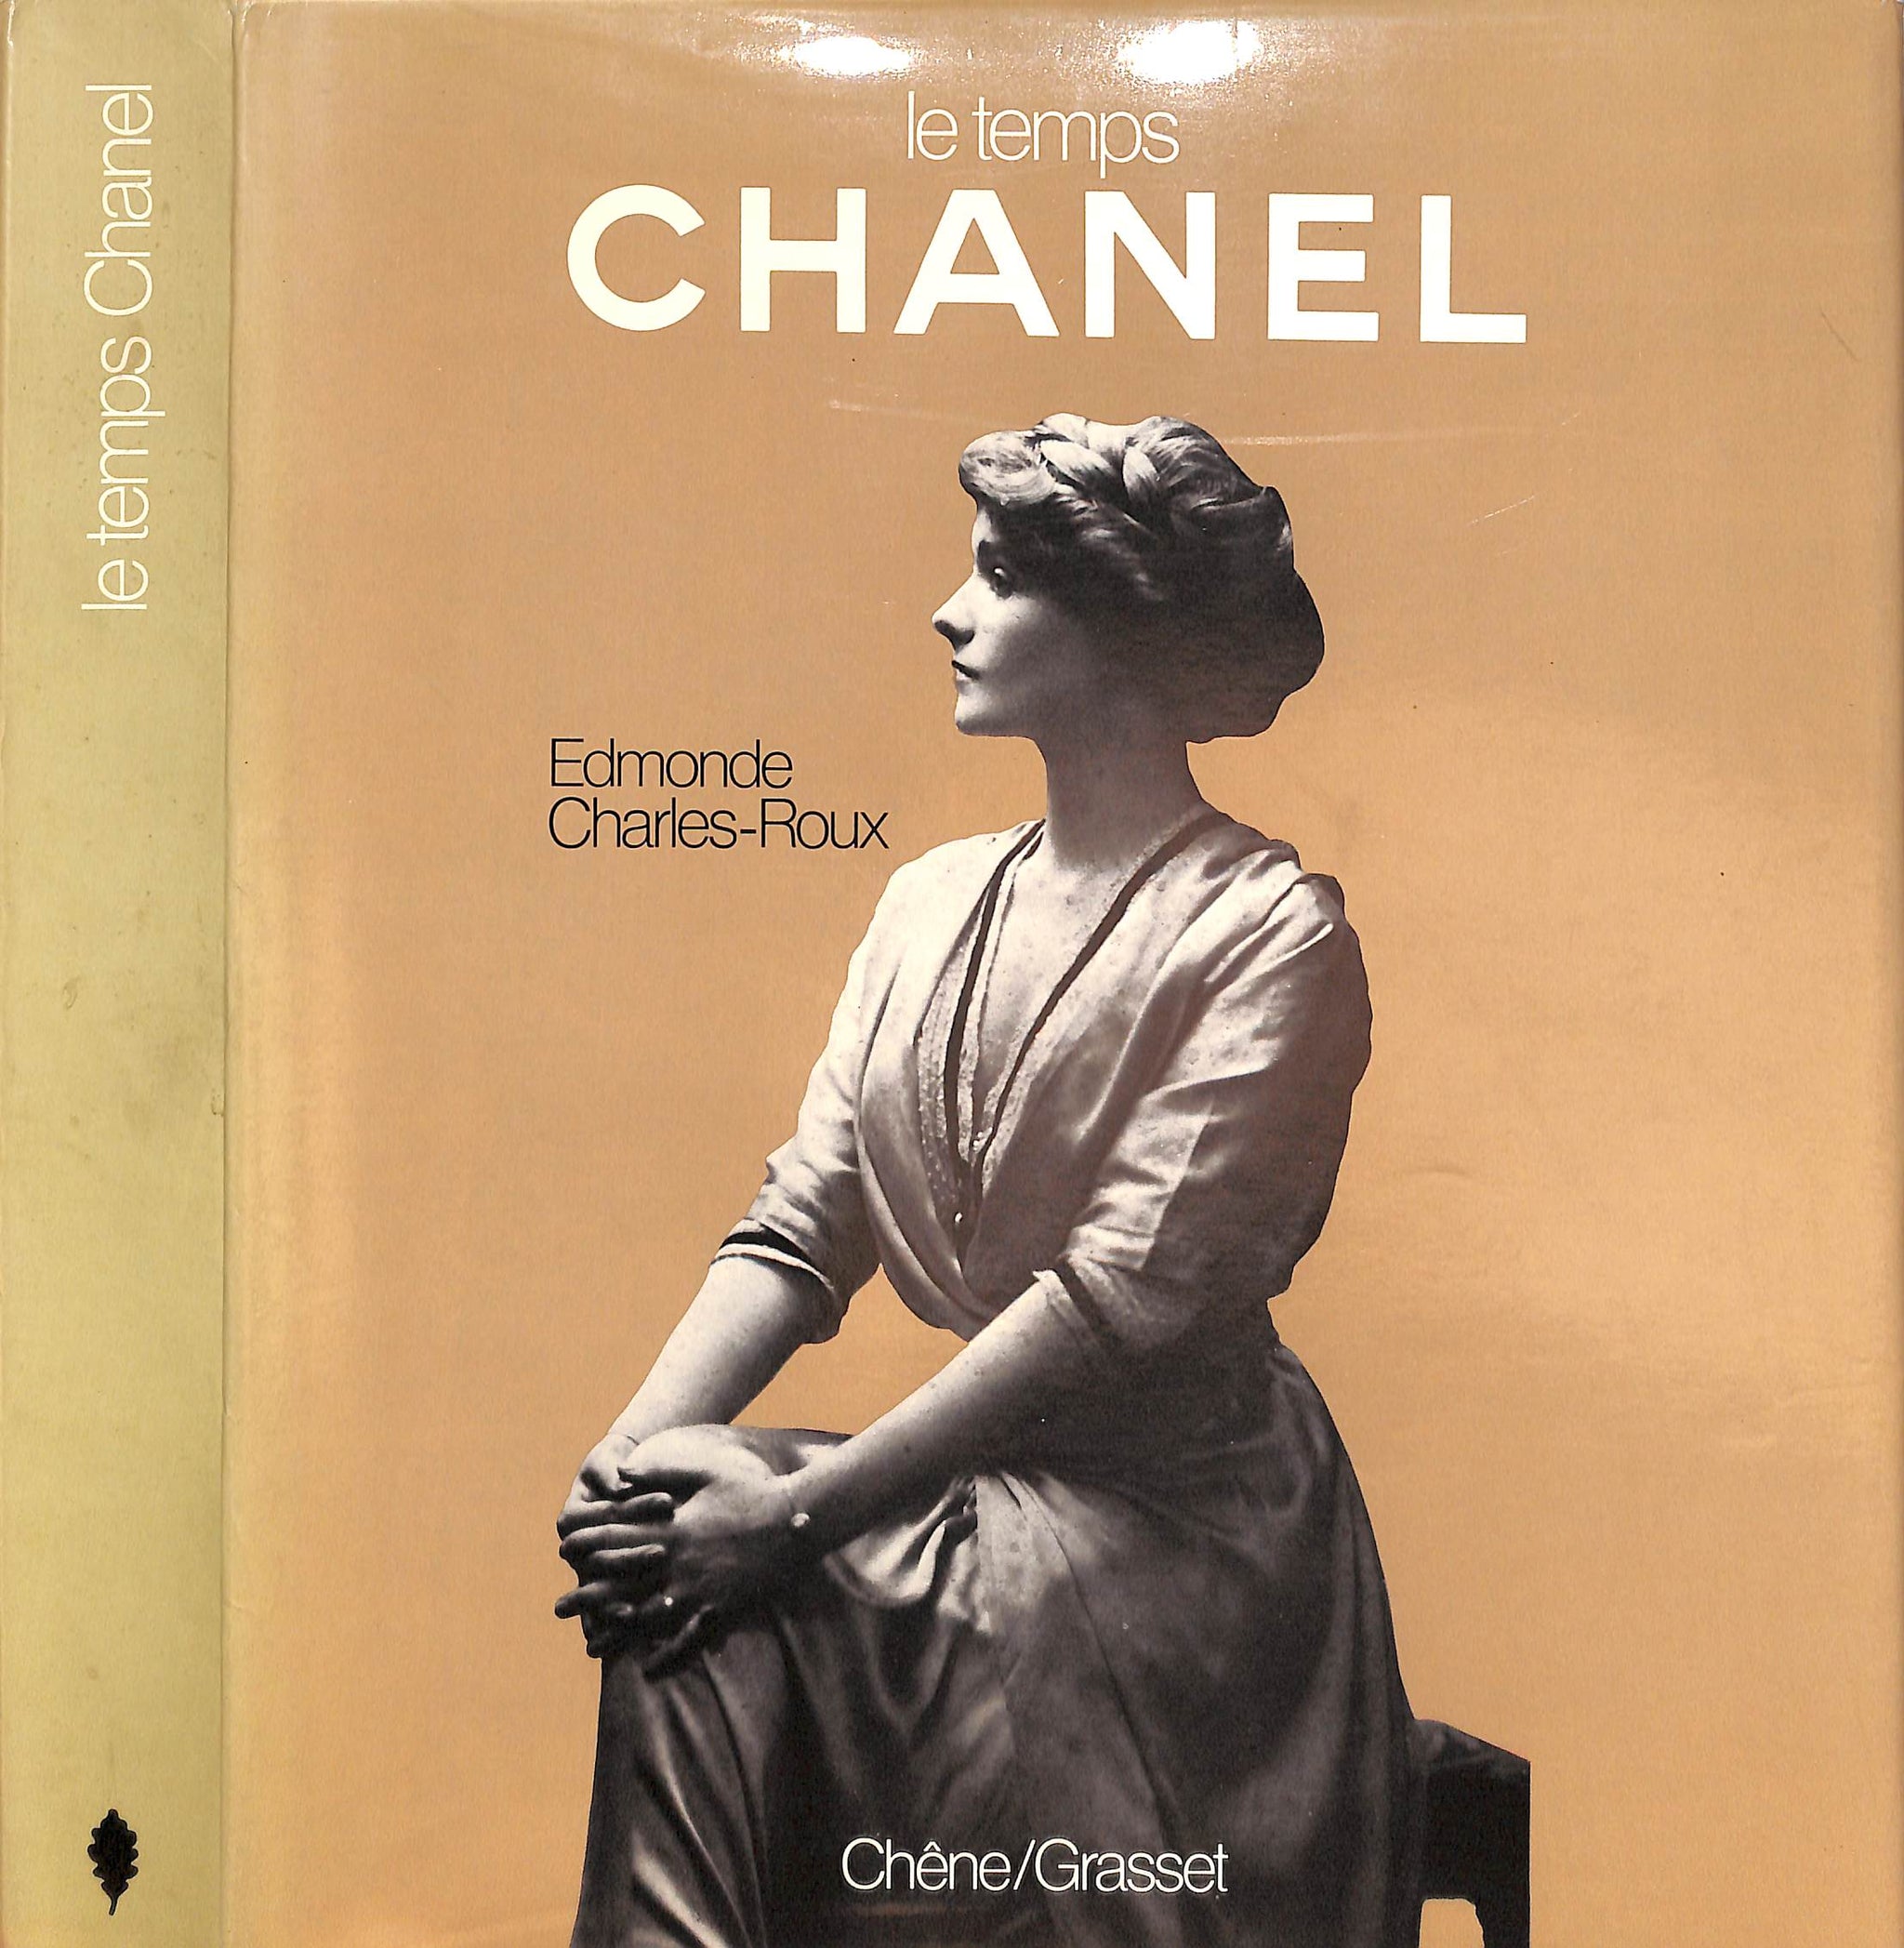 V Magazine presents its Chanel Book covers with Margot Lily  Jennie